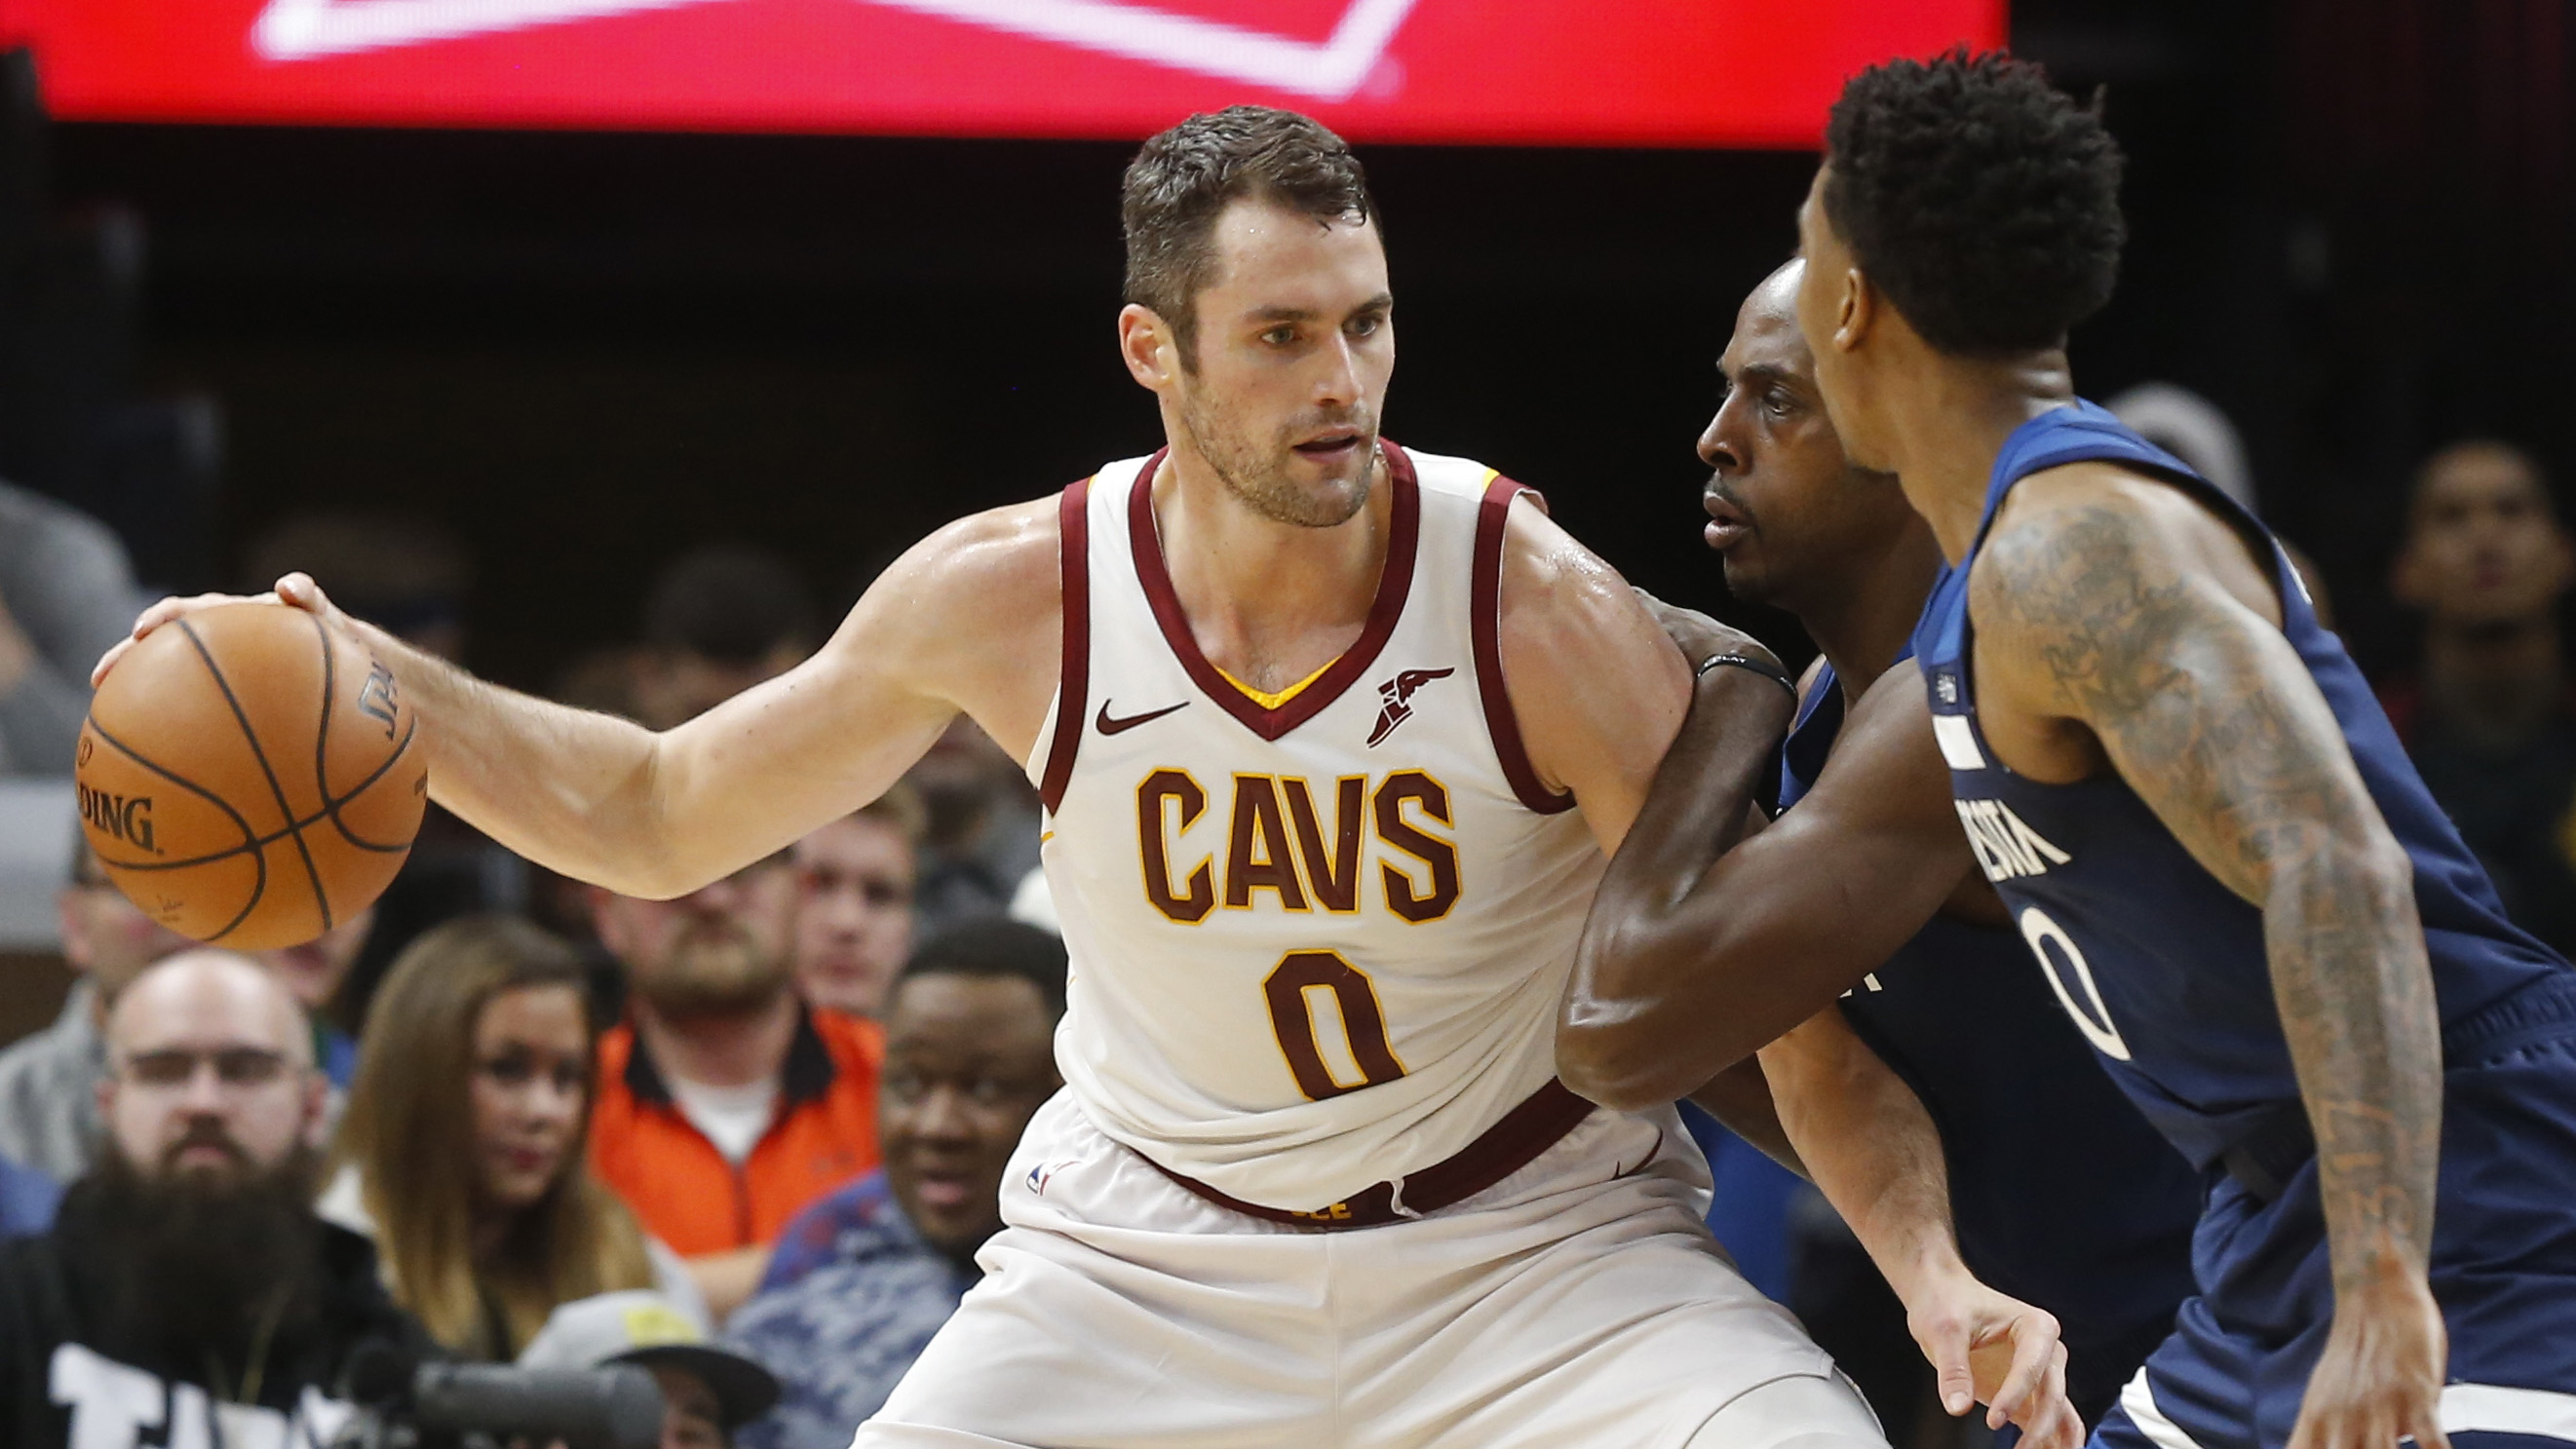 Cavs’ All-Star forward Love could be out until “new year”